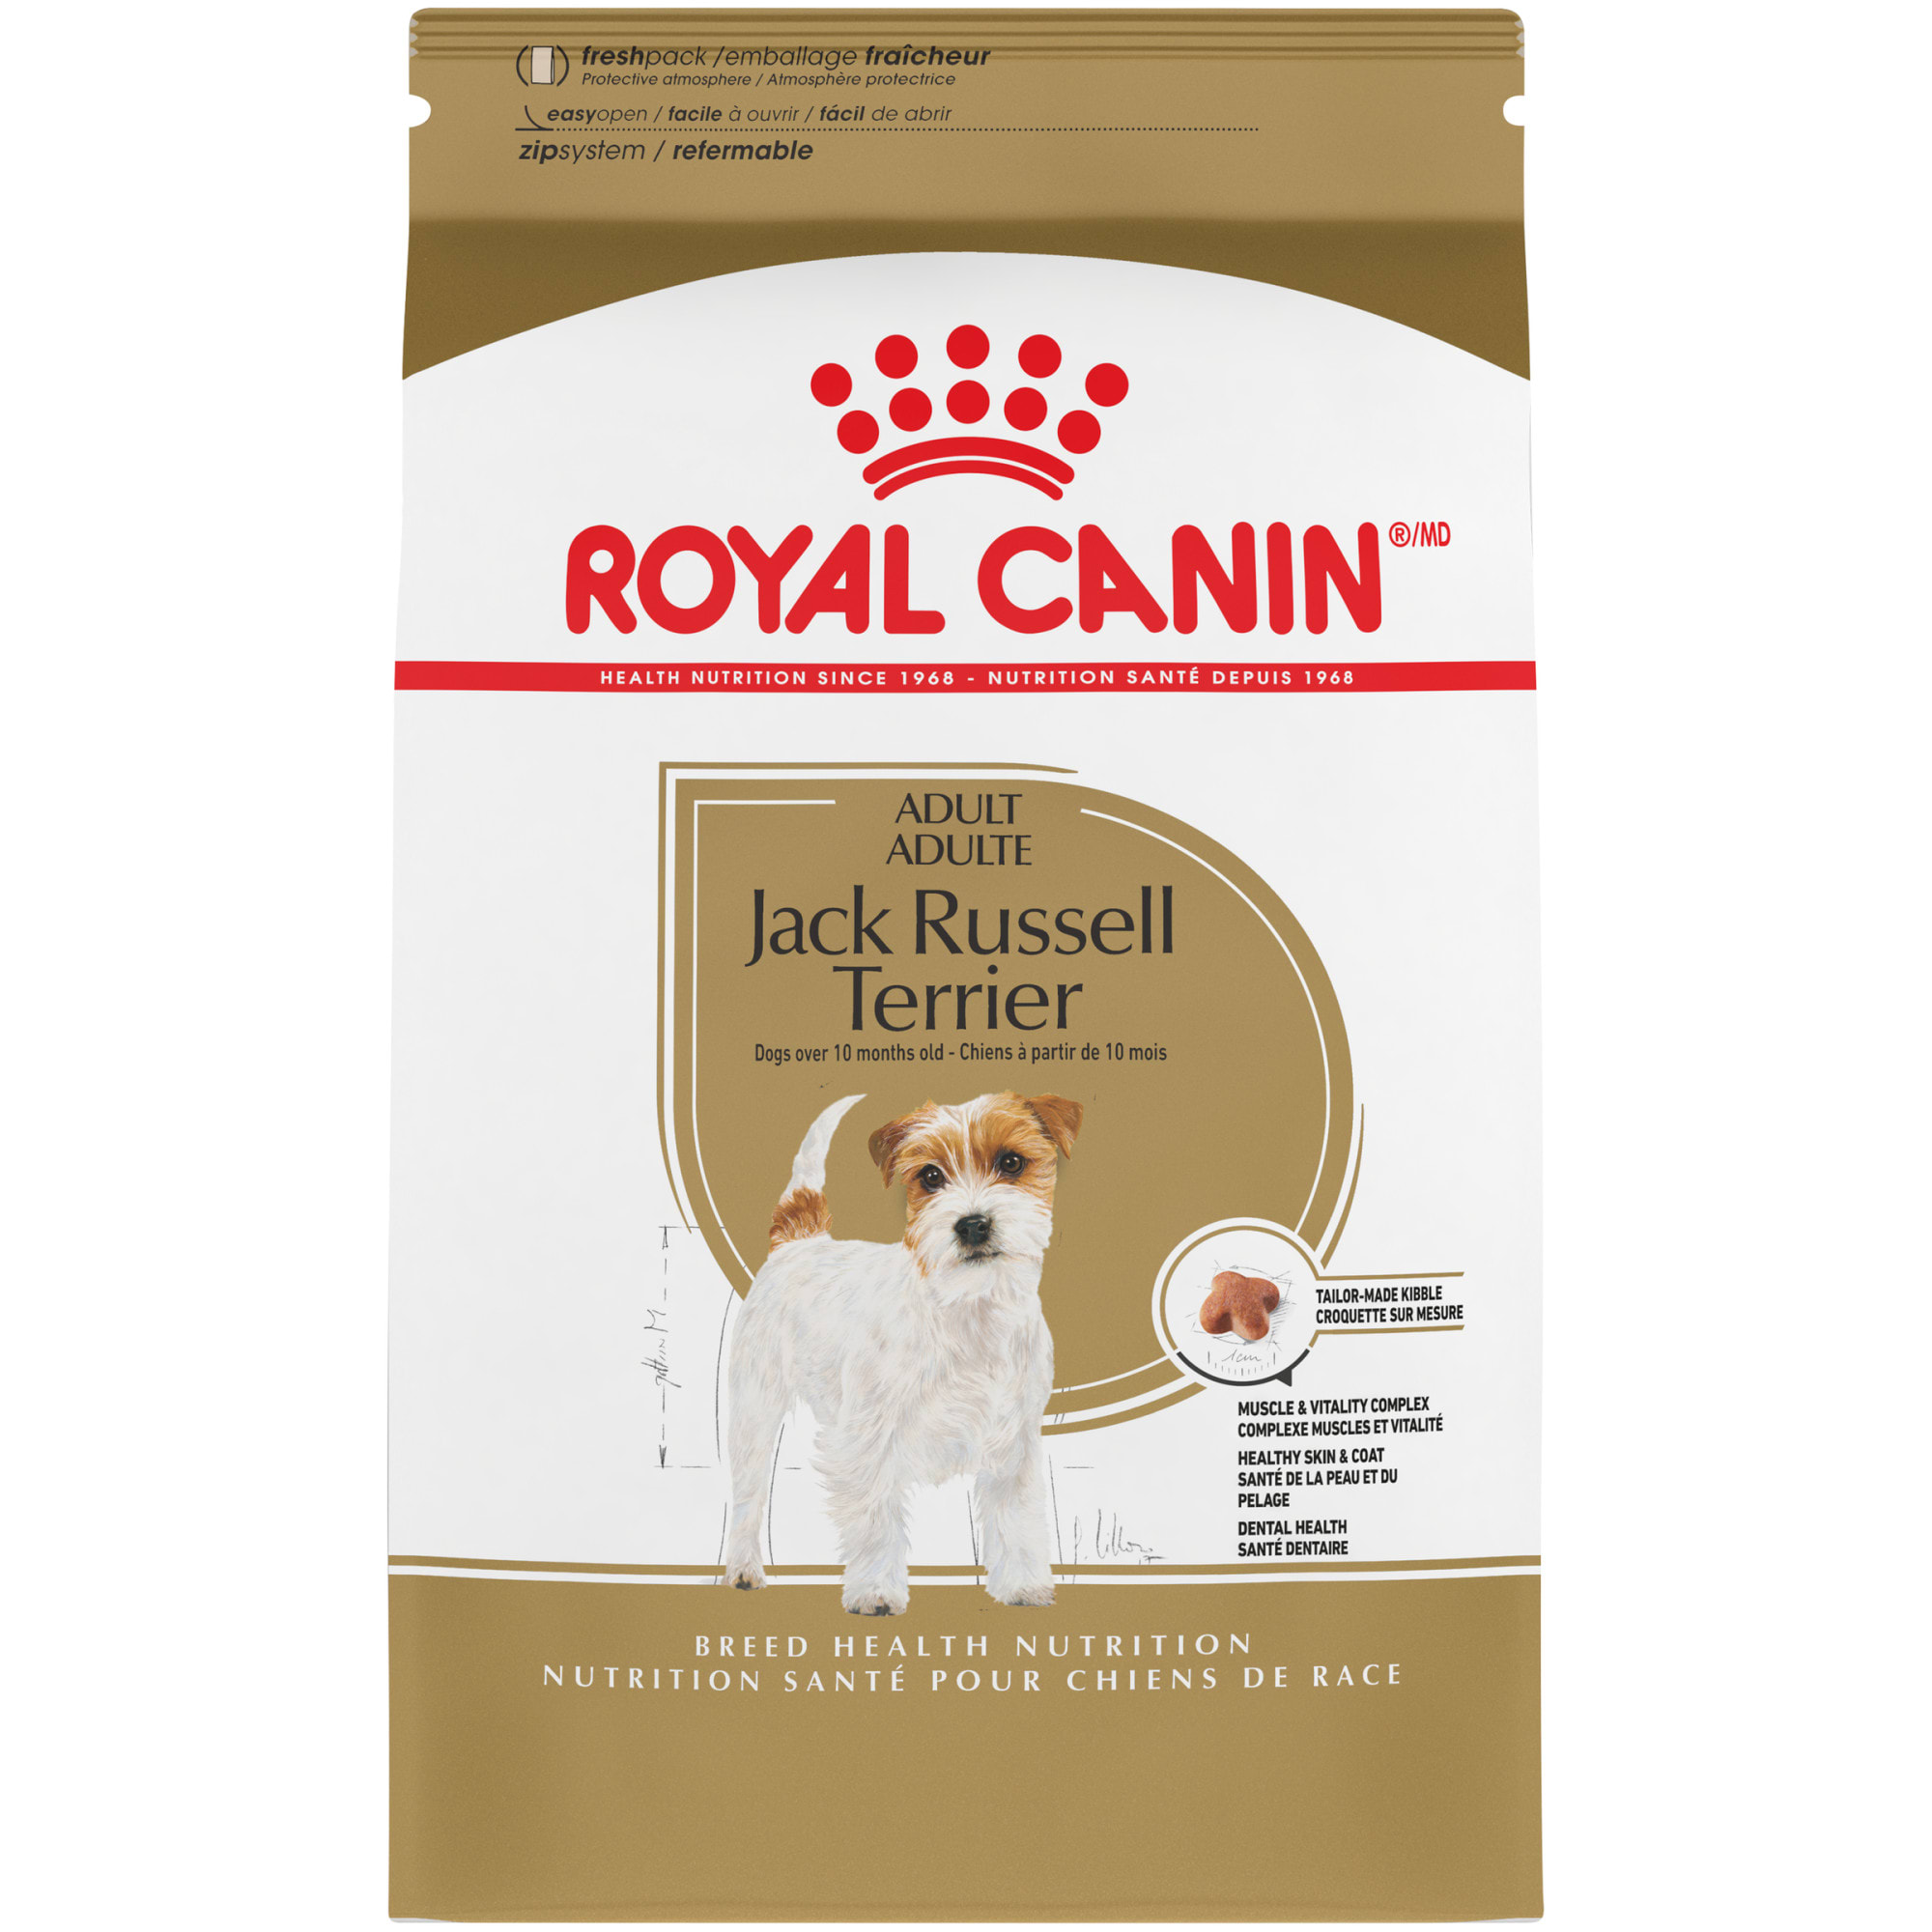 What is the Best Dog Food for Jack Russells?